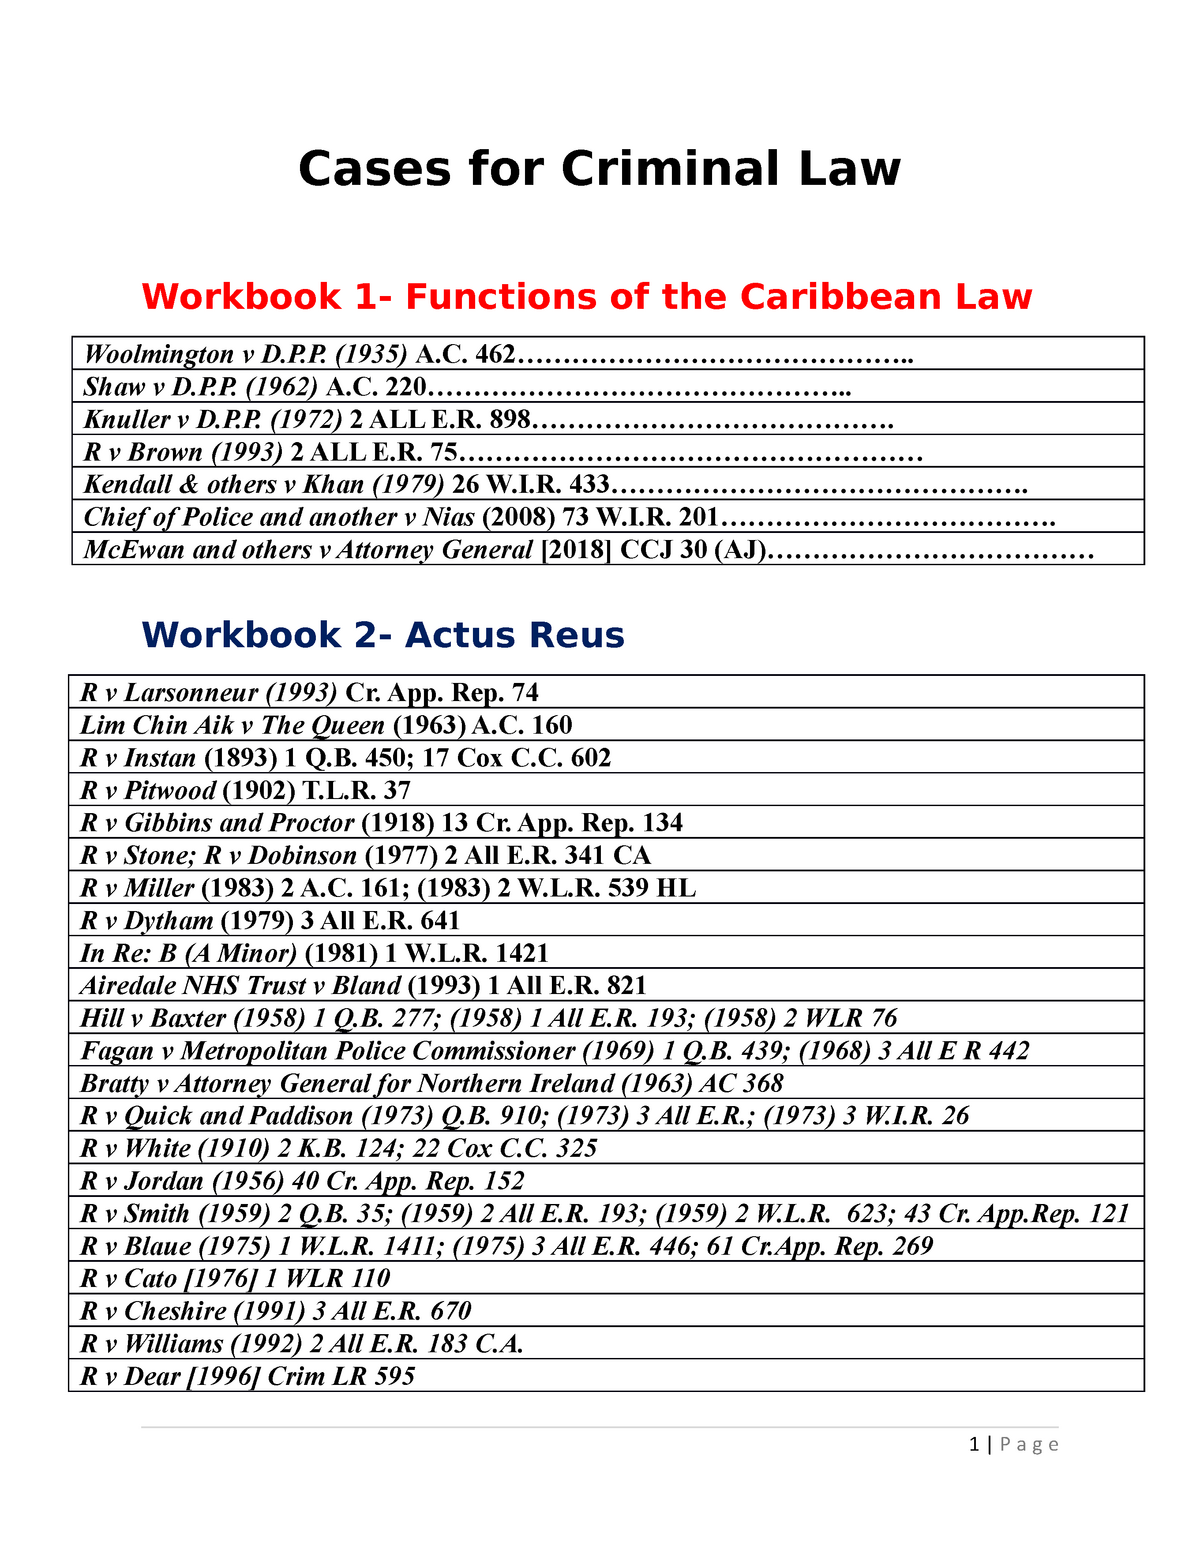 Cases for Criminal Law Cases for Criminal Law Workbook 1 Functions